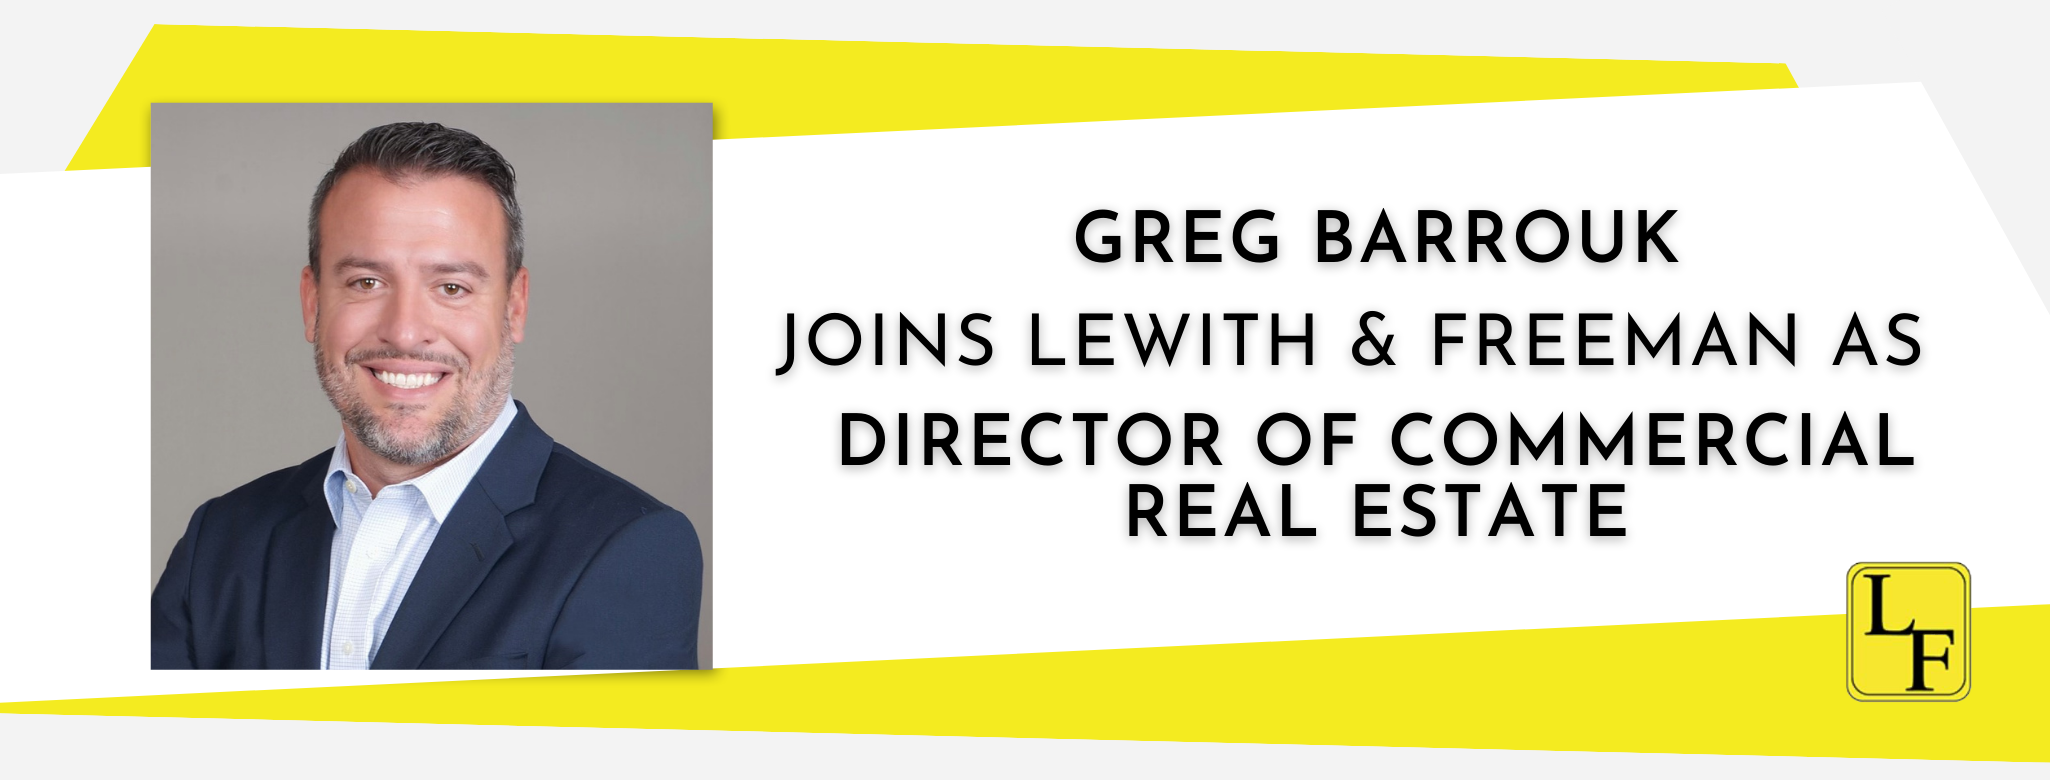 Greg Barrouk joins Lewith & Freeman Real Estate as Director of Commercial Real Estate